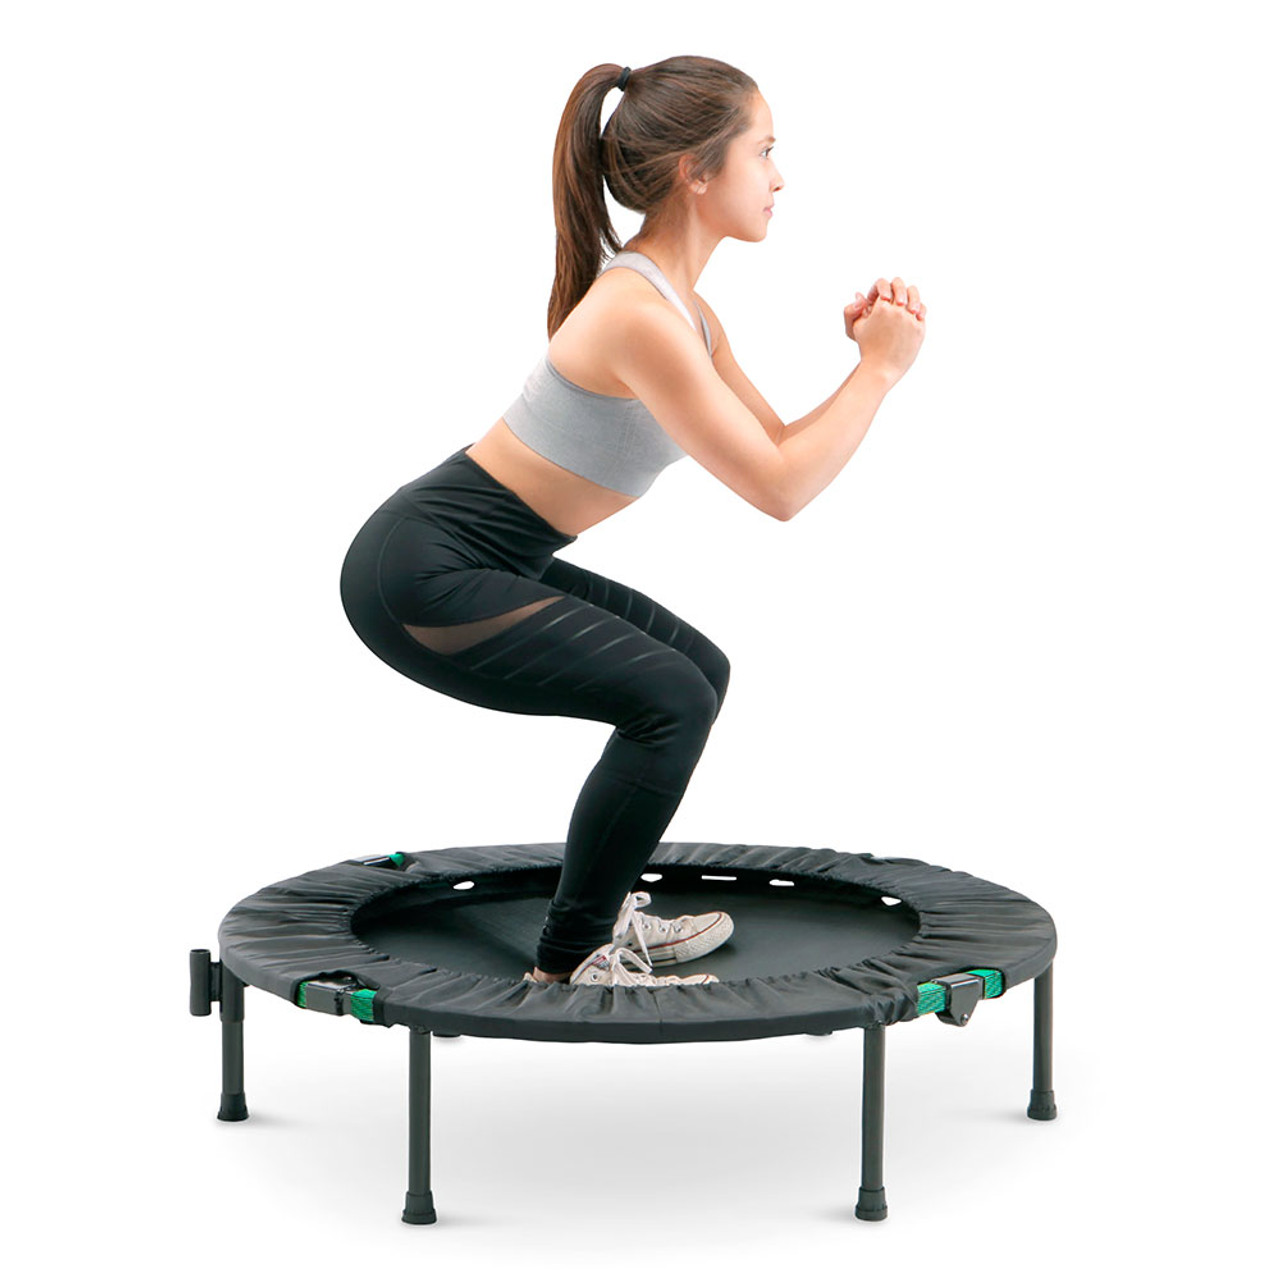 Rebounding Exercise: My Honest Review Of Mini Trampoline Workouts